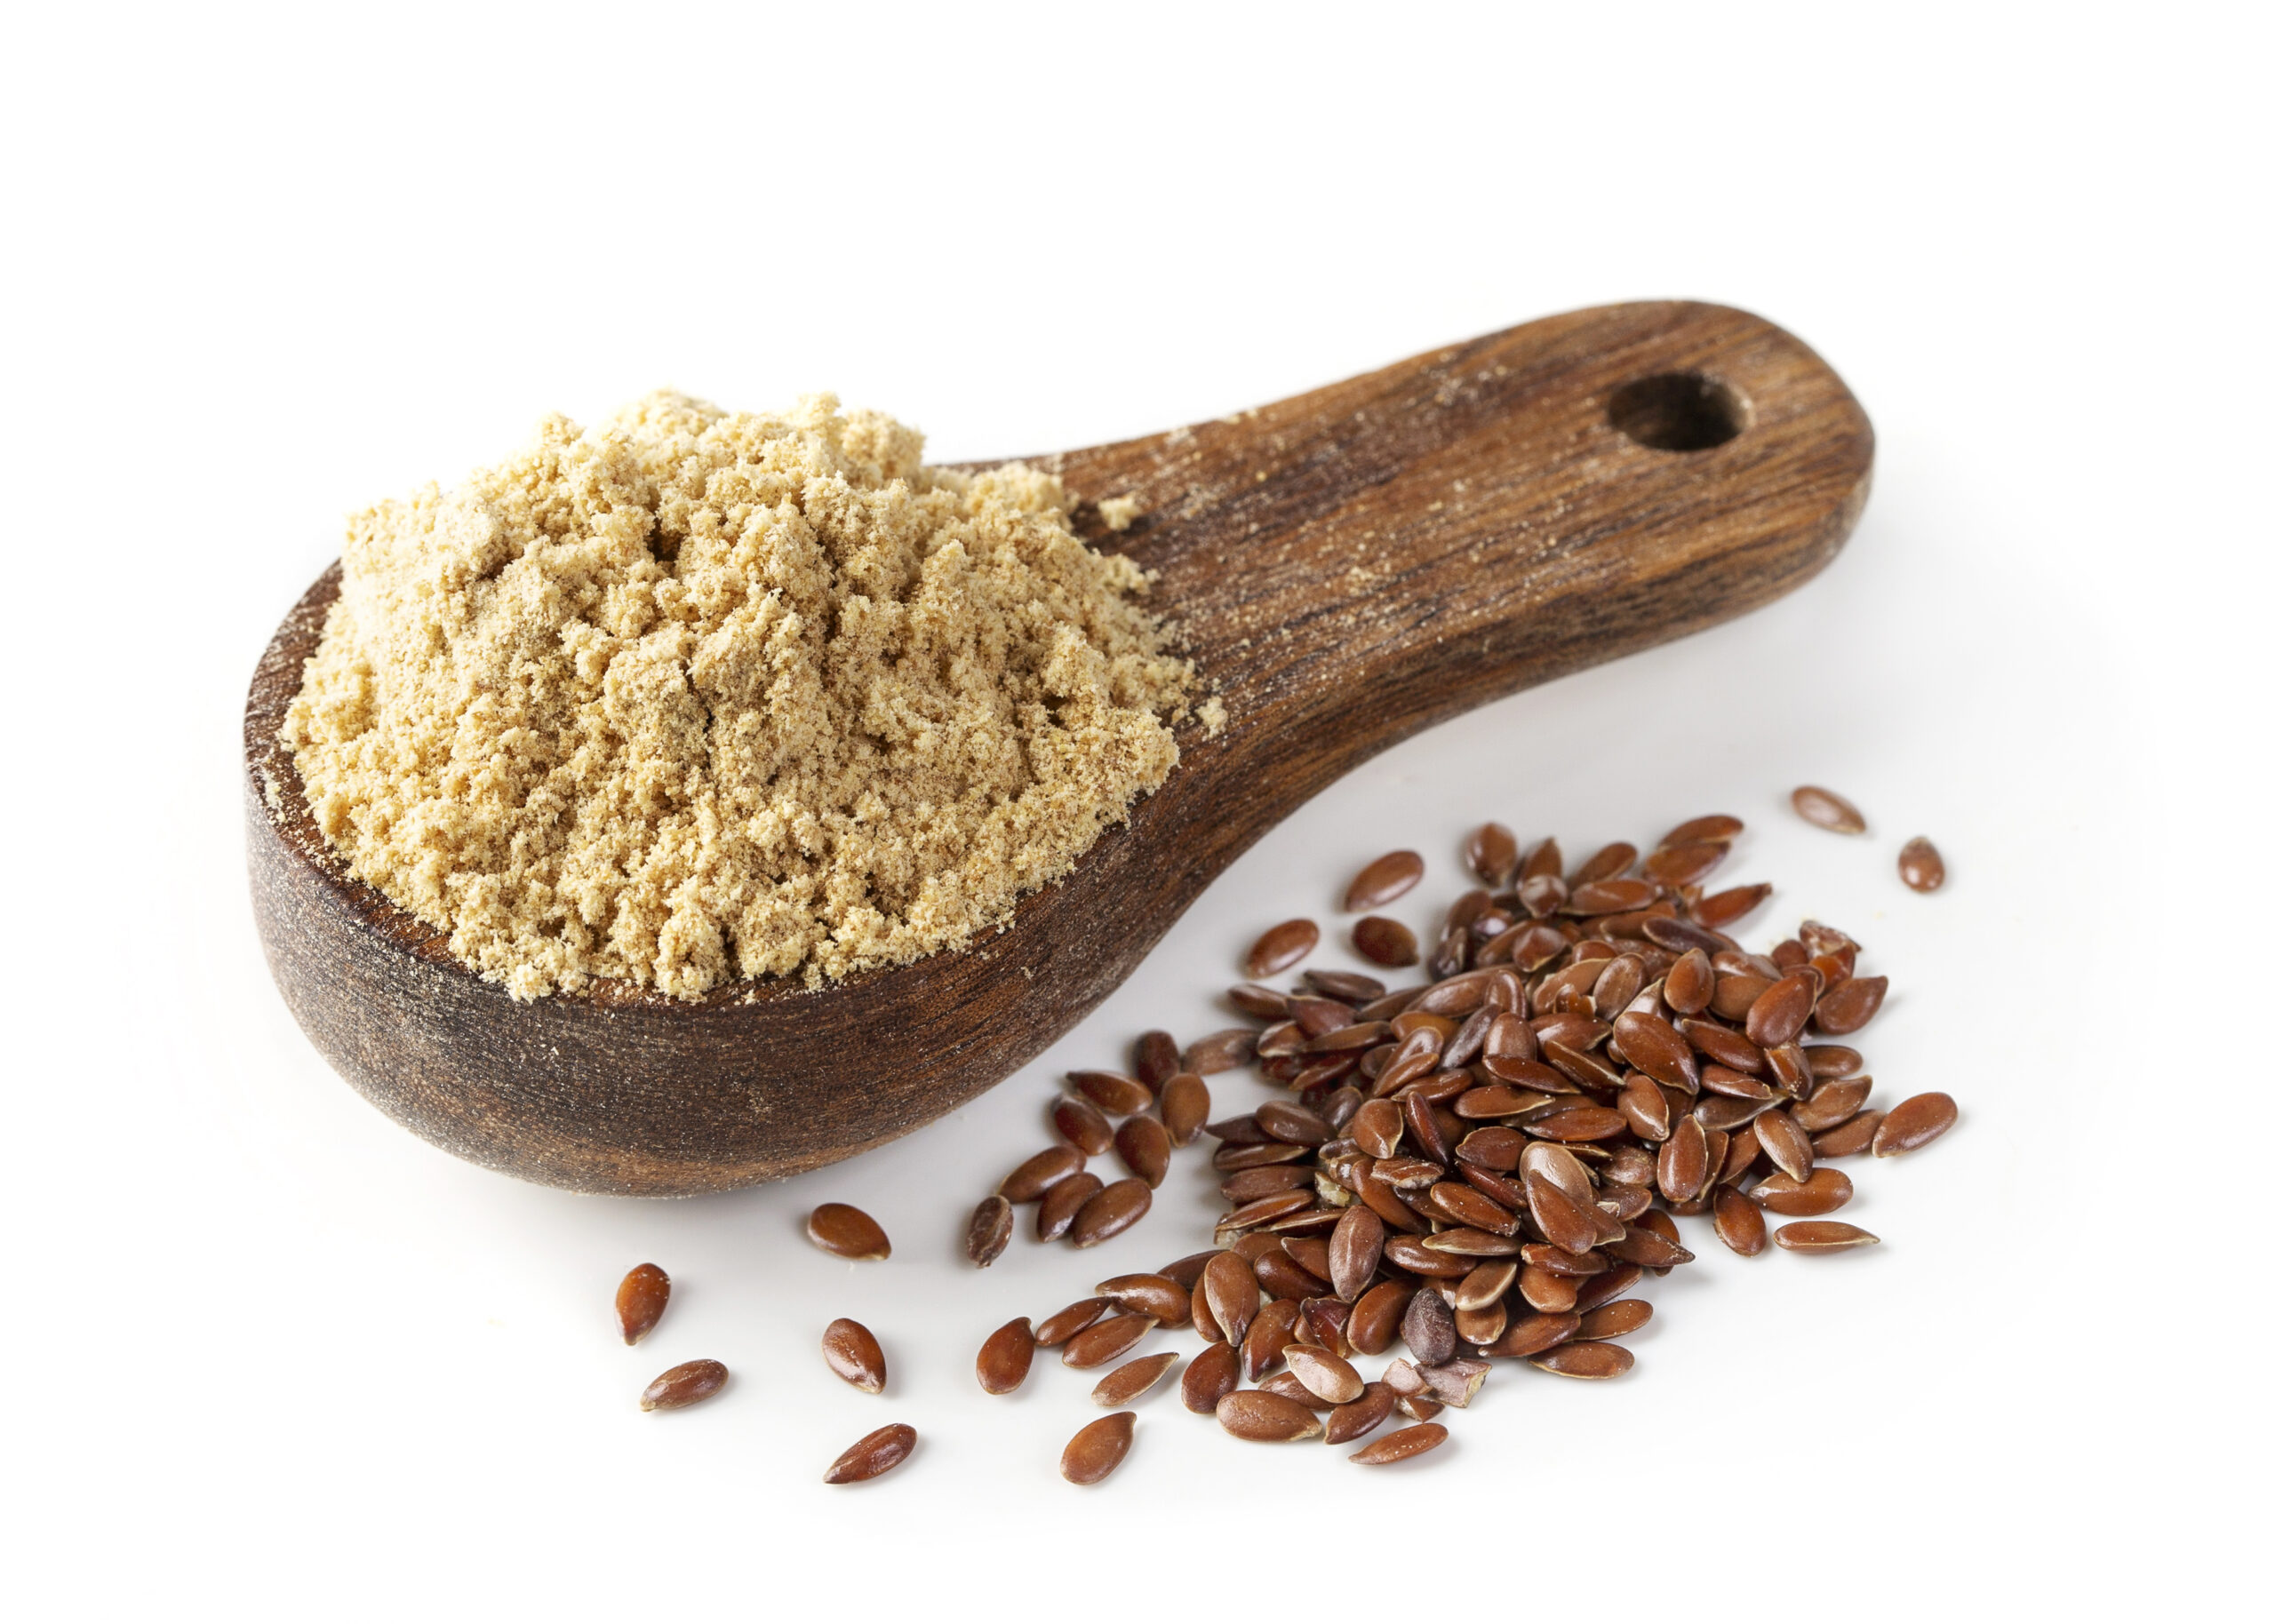 Flax seed meal needed for flax egg recipe